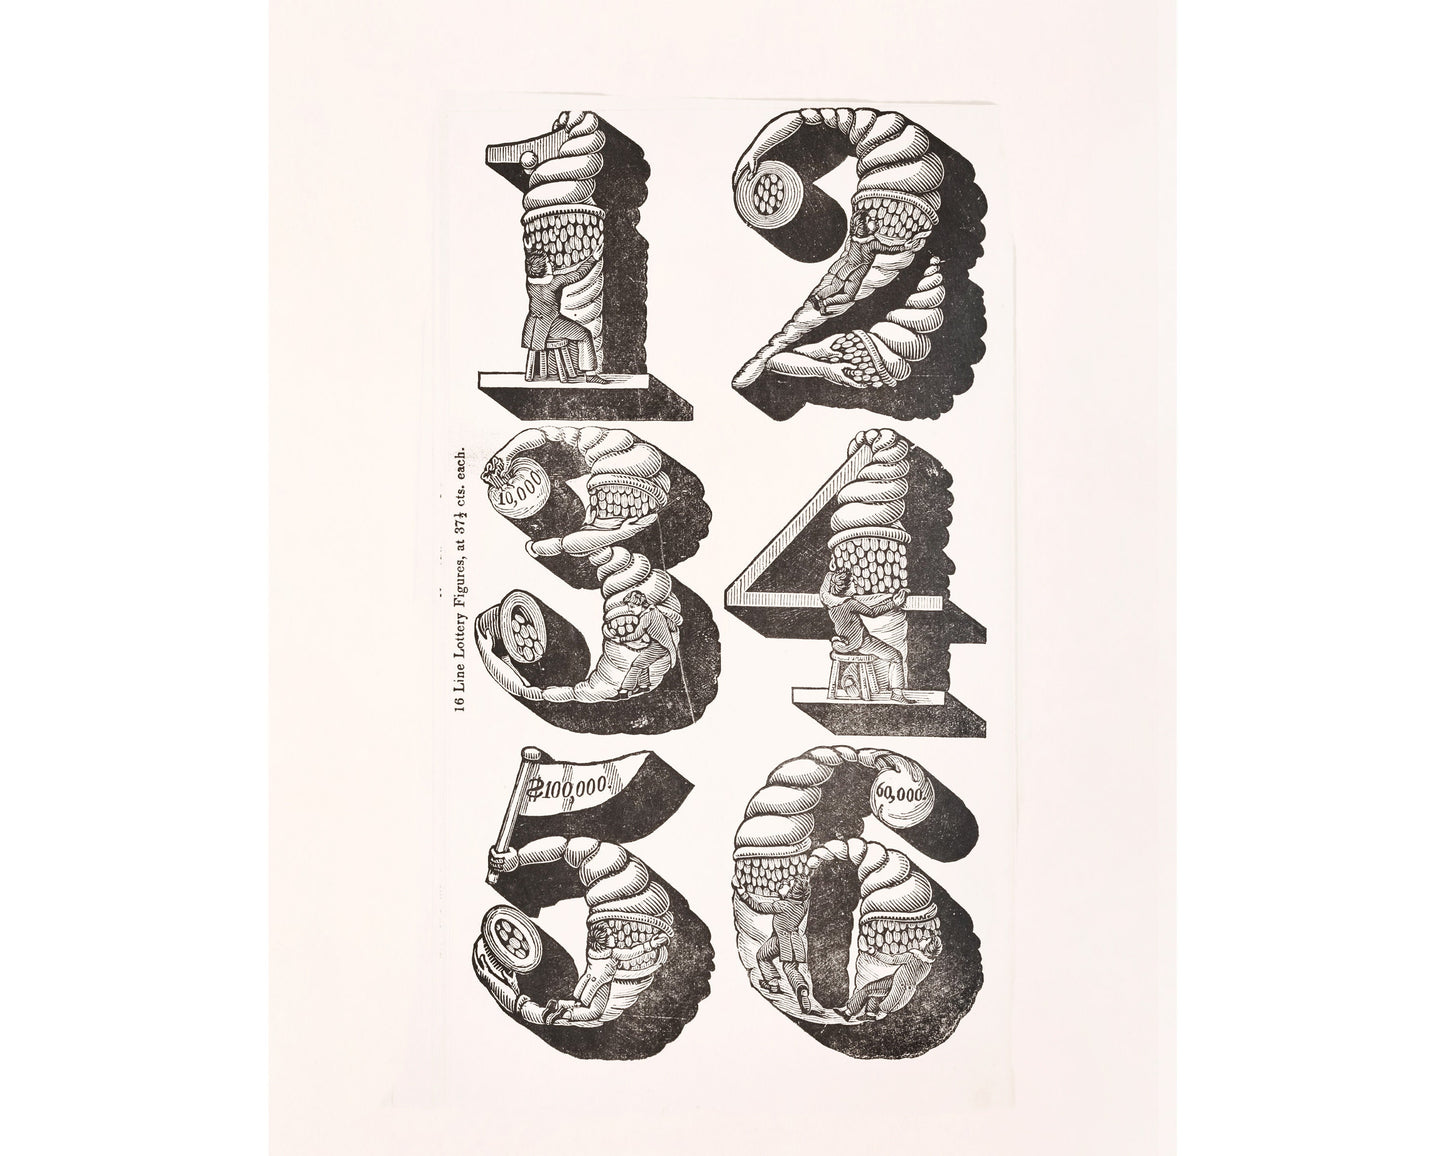 Vintage typography art | Specimens of type | Antique Numbers wall art | Victorian gothic antique lettering | Modern Vintage decor